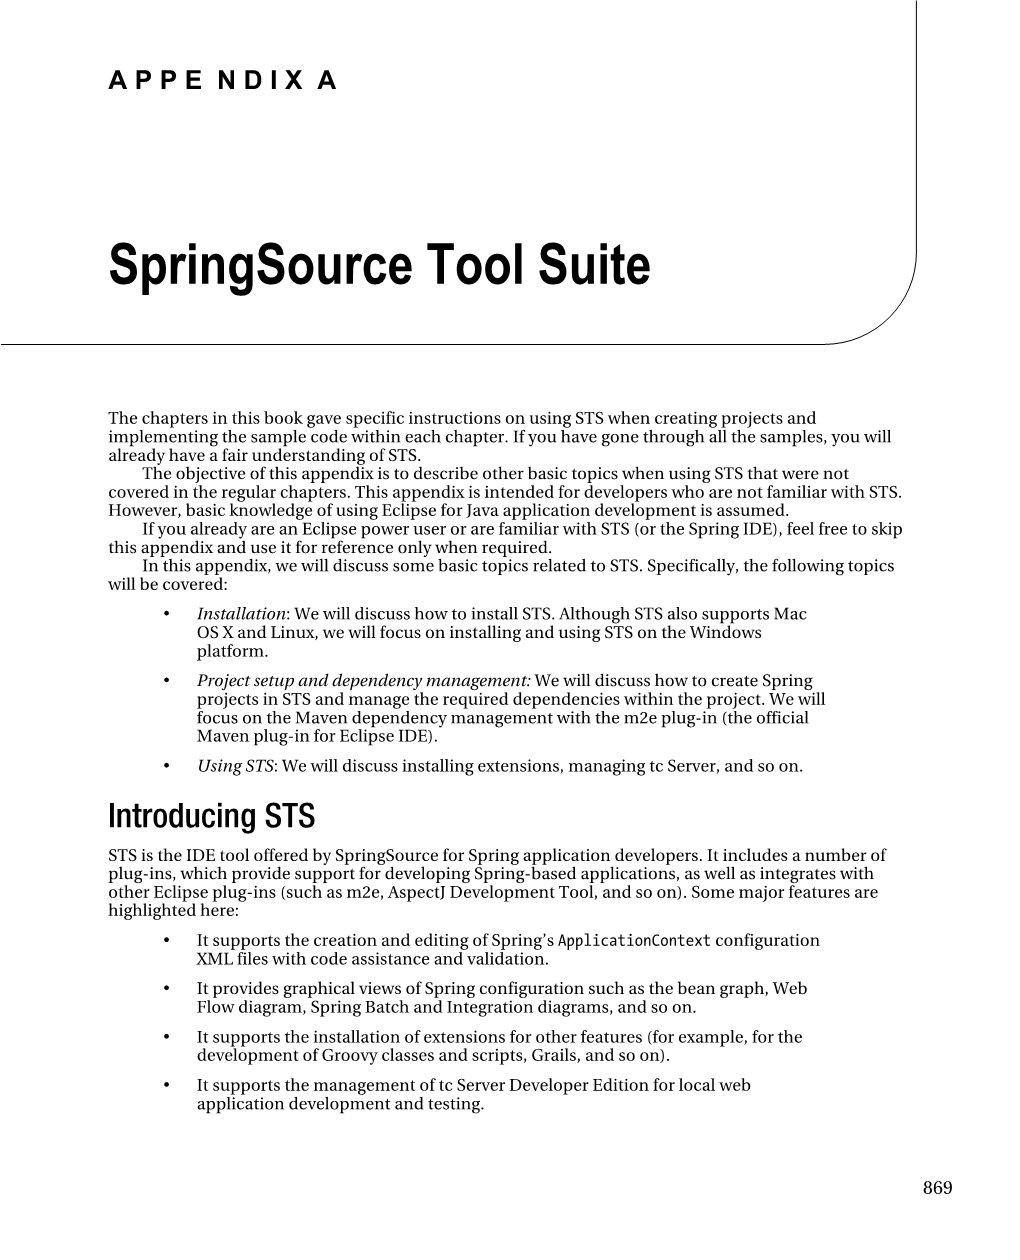 Springsource Tool Suite